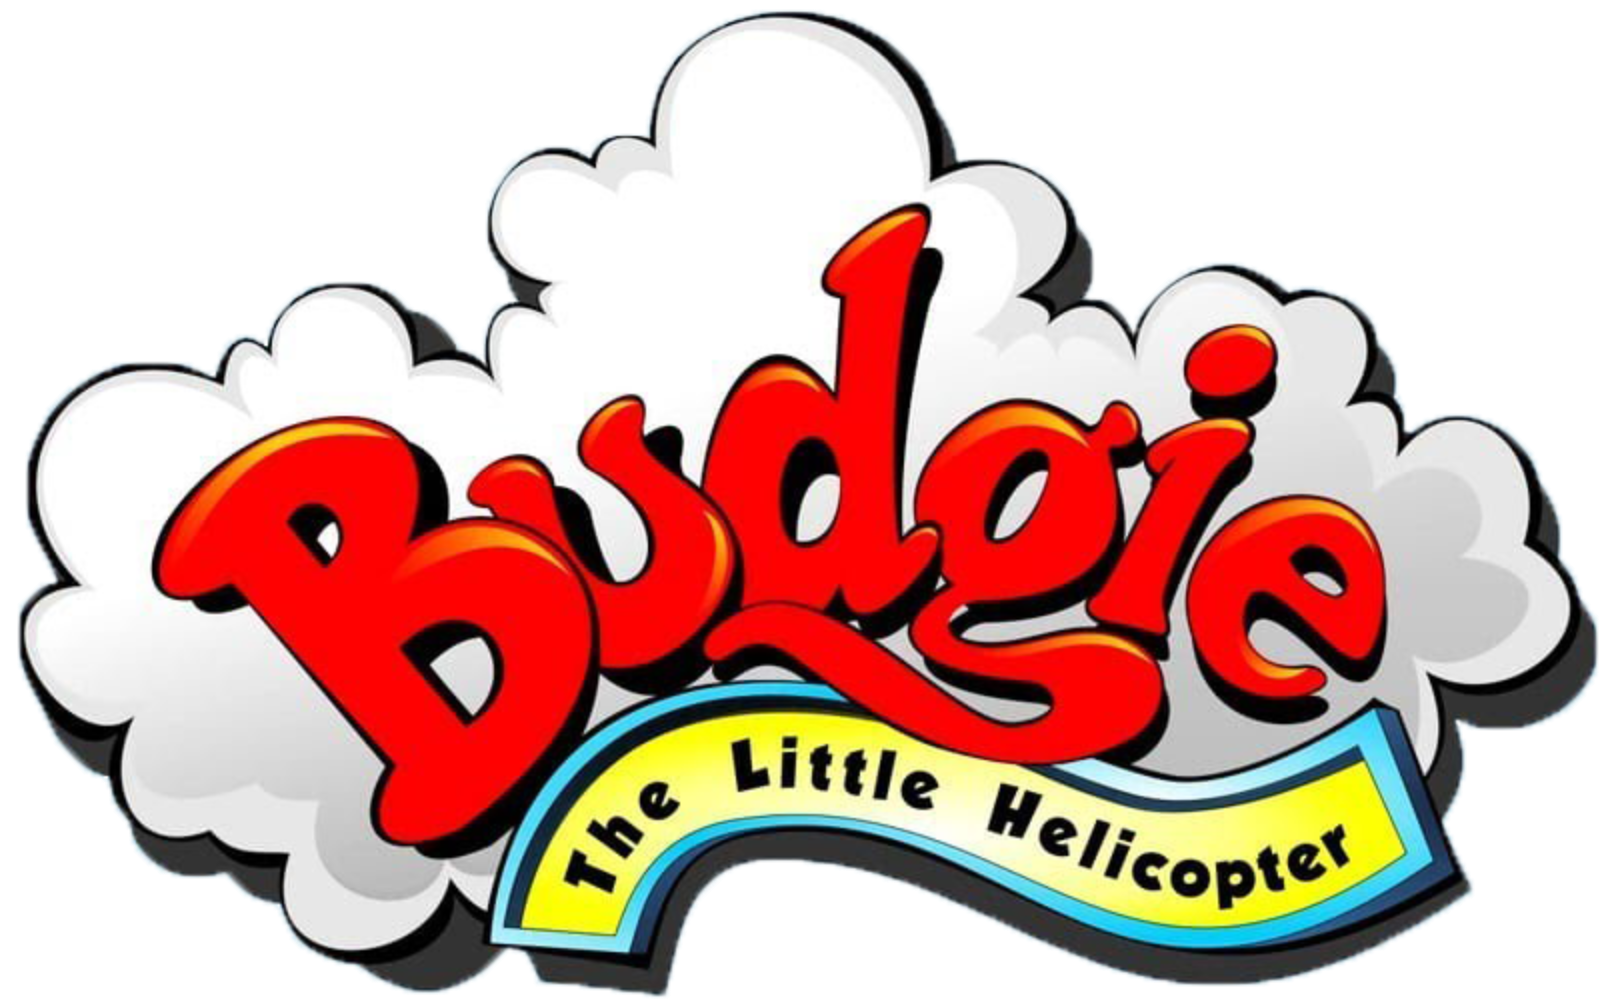 Budgie the Little Helicopter Complete (4 DVDs Box Set)